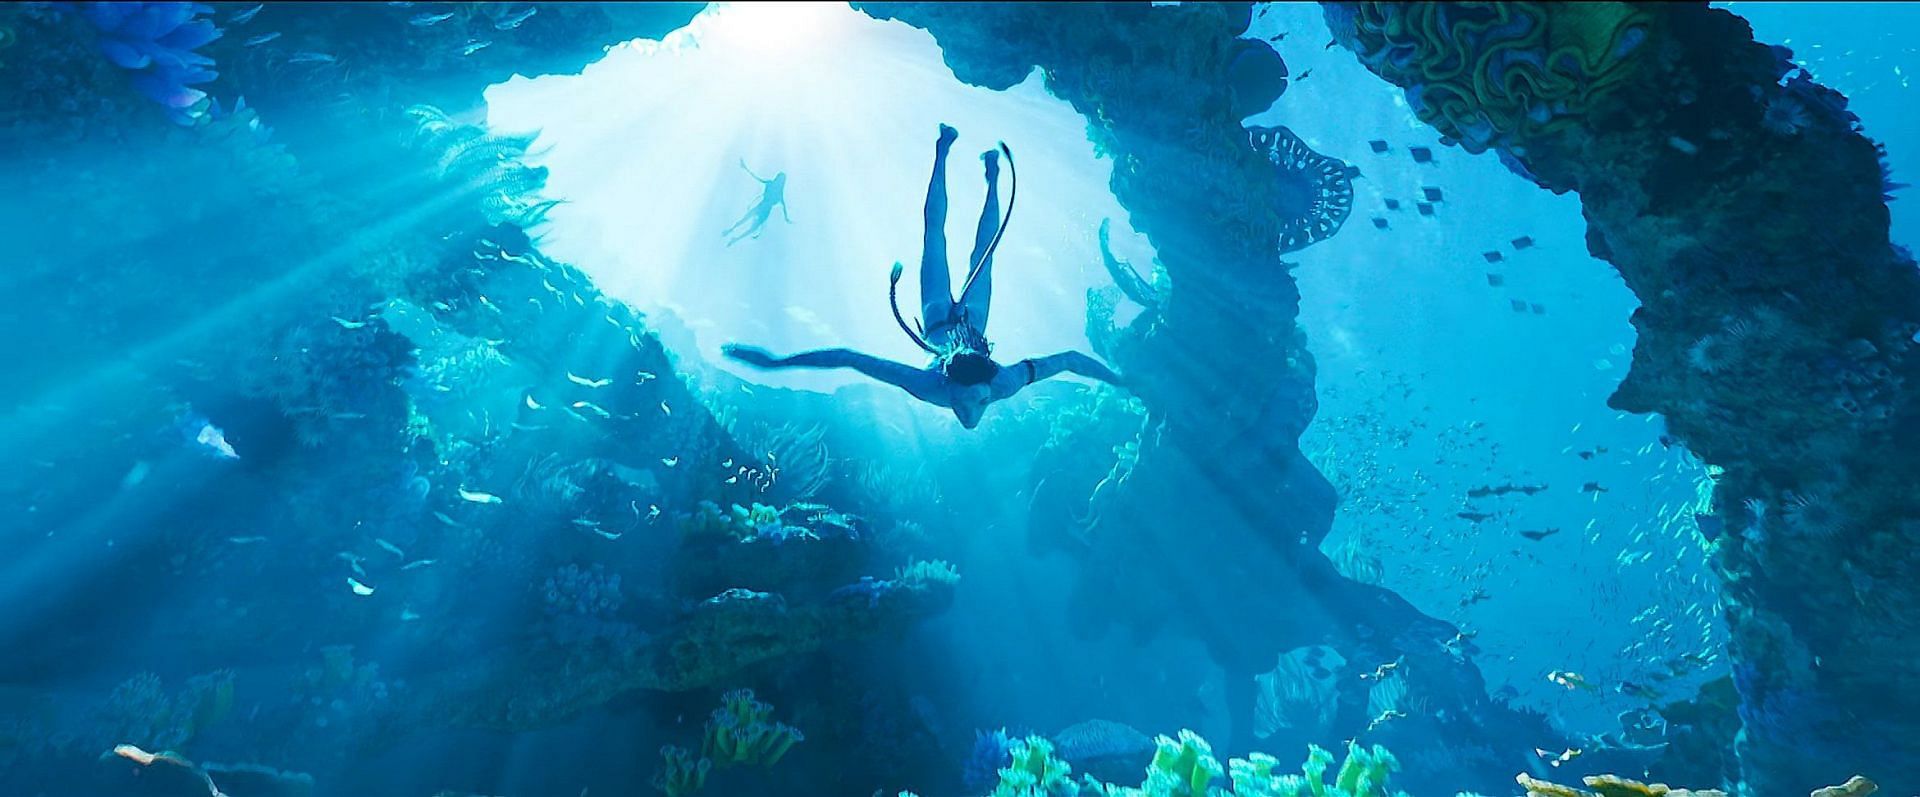 A still from Avatar: The Way of Water. (Photo via Twitter/@screenscaps)